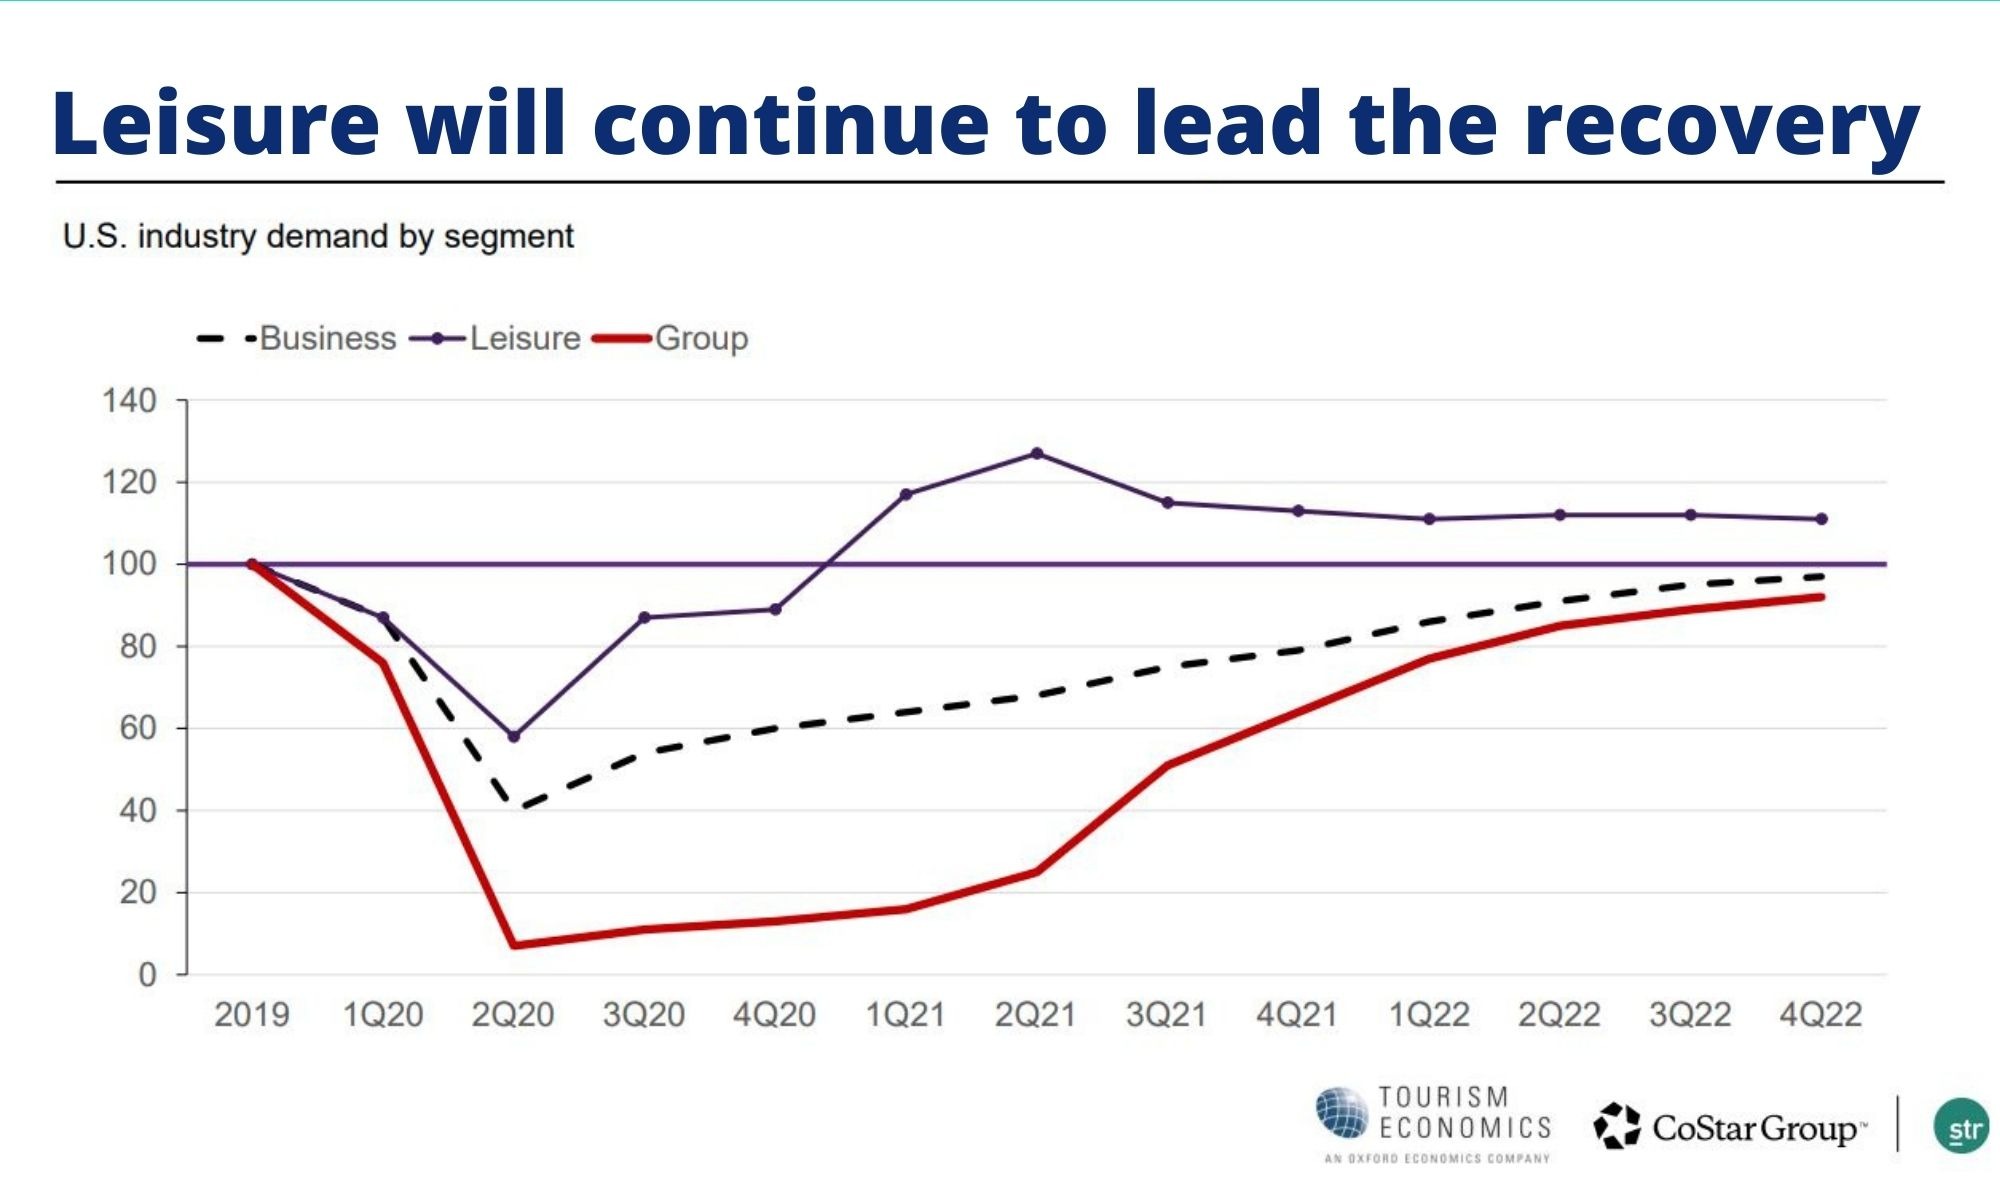 A 2022 chart by Tourism Economics and Costar Group titled "Leisure will continue to lead the recovery. Of three lines labeled Business, Leisure and Group, leisure is consistently the highest